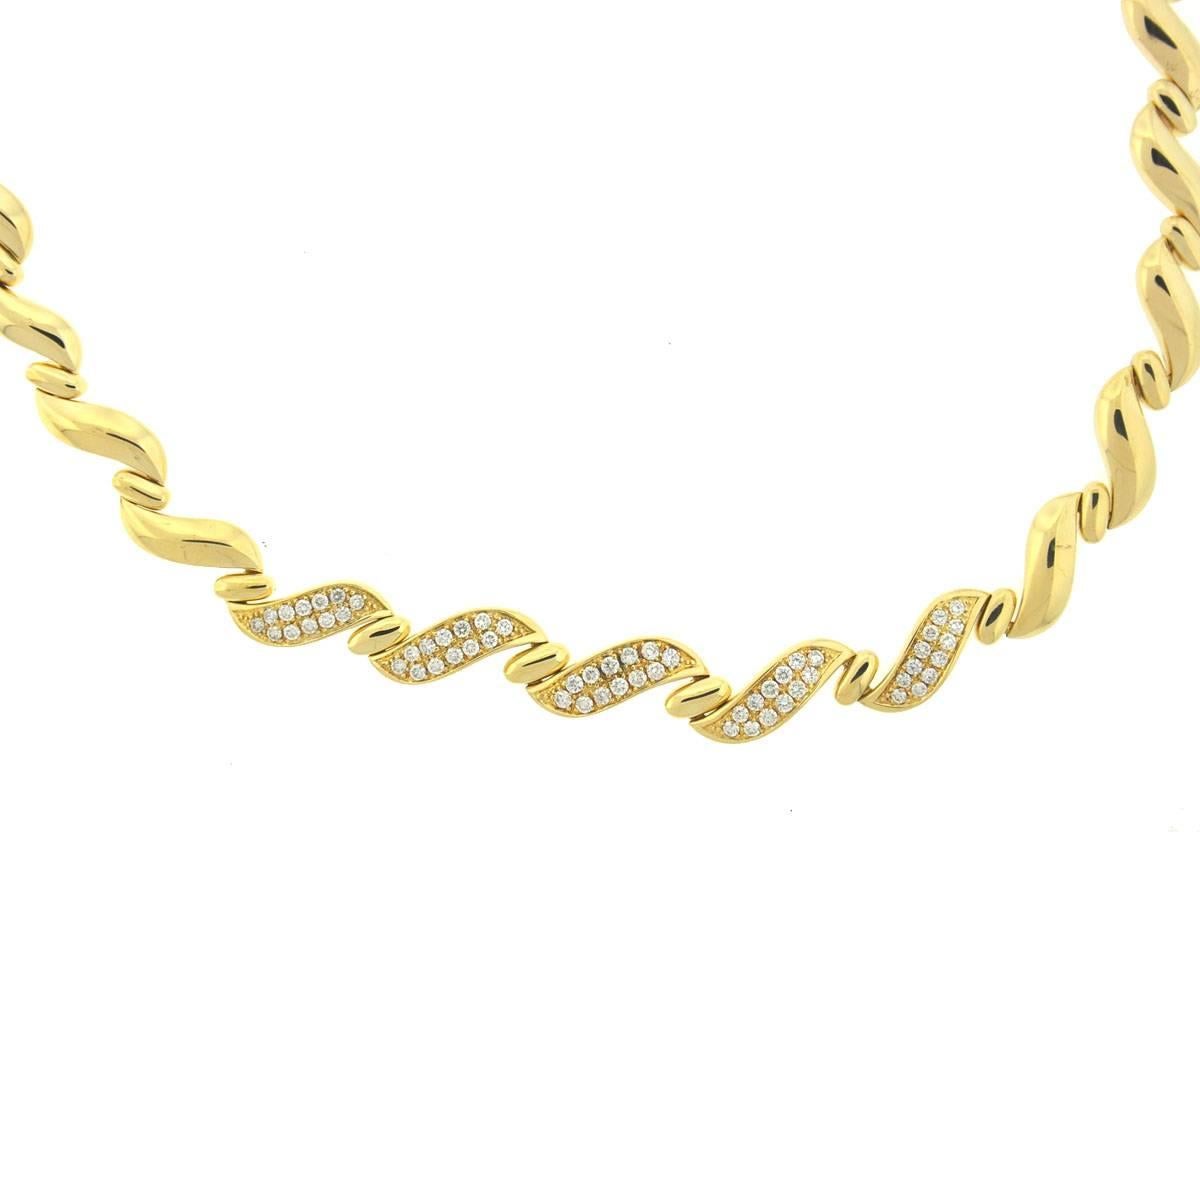 Style - Ladies Necklace
Metal - 14k Yellow Gold
Weight - 52.8 Grams
Chain Length - 17